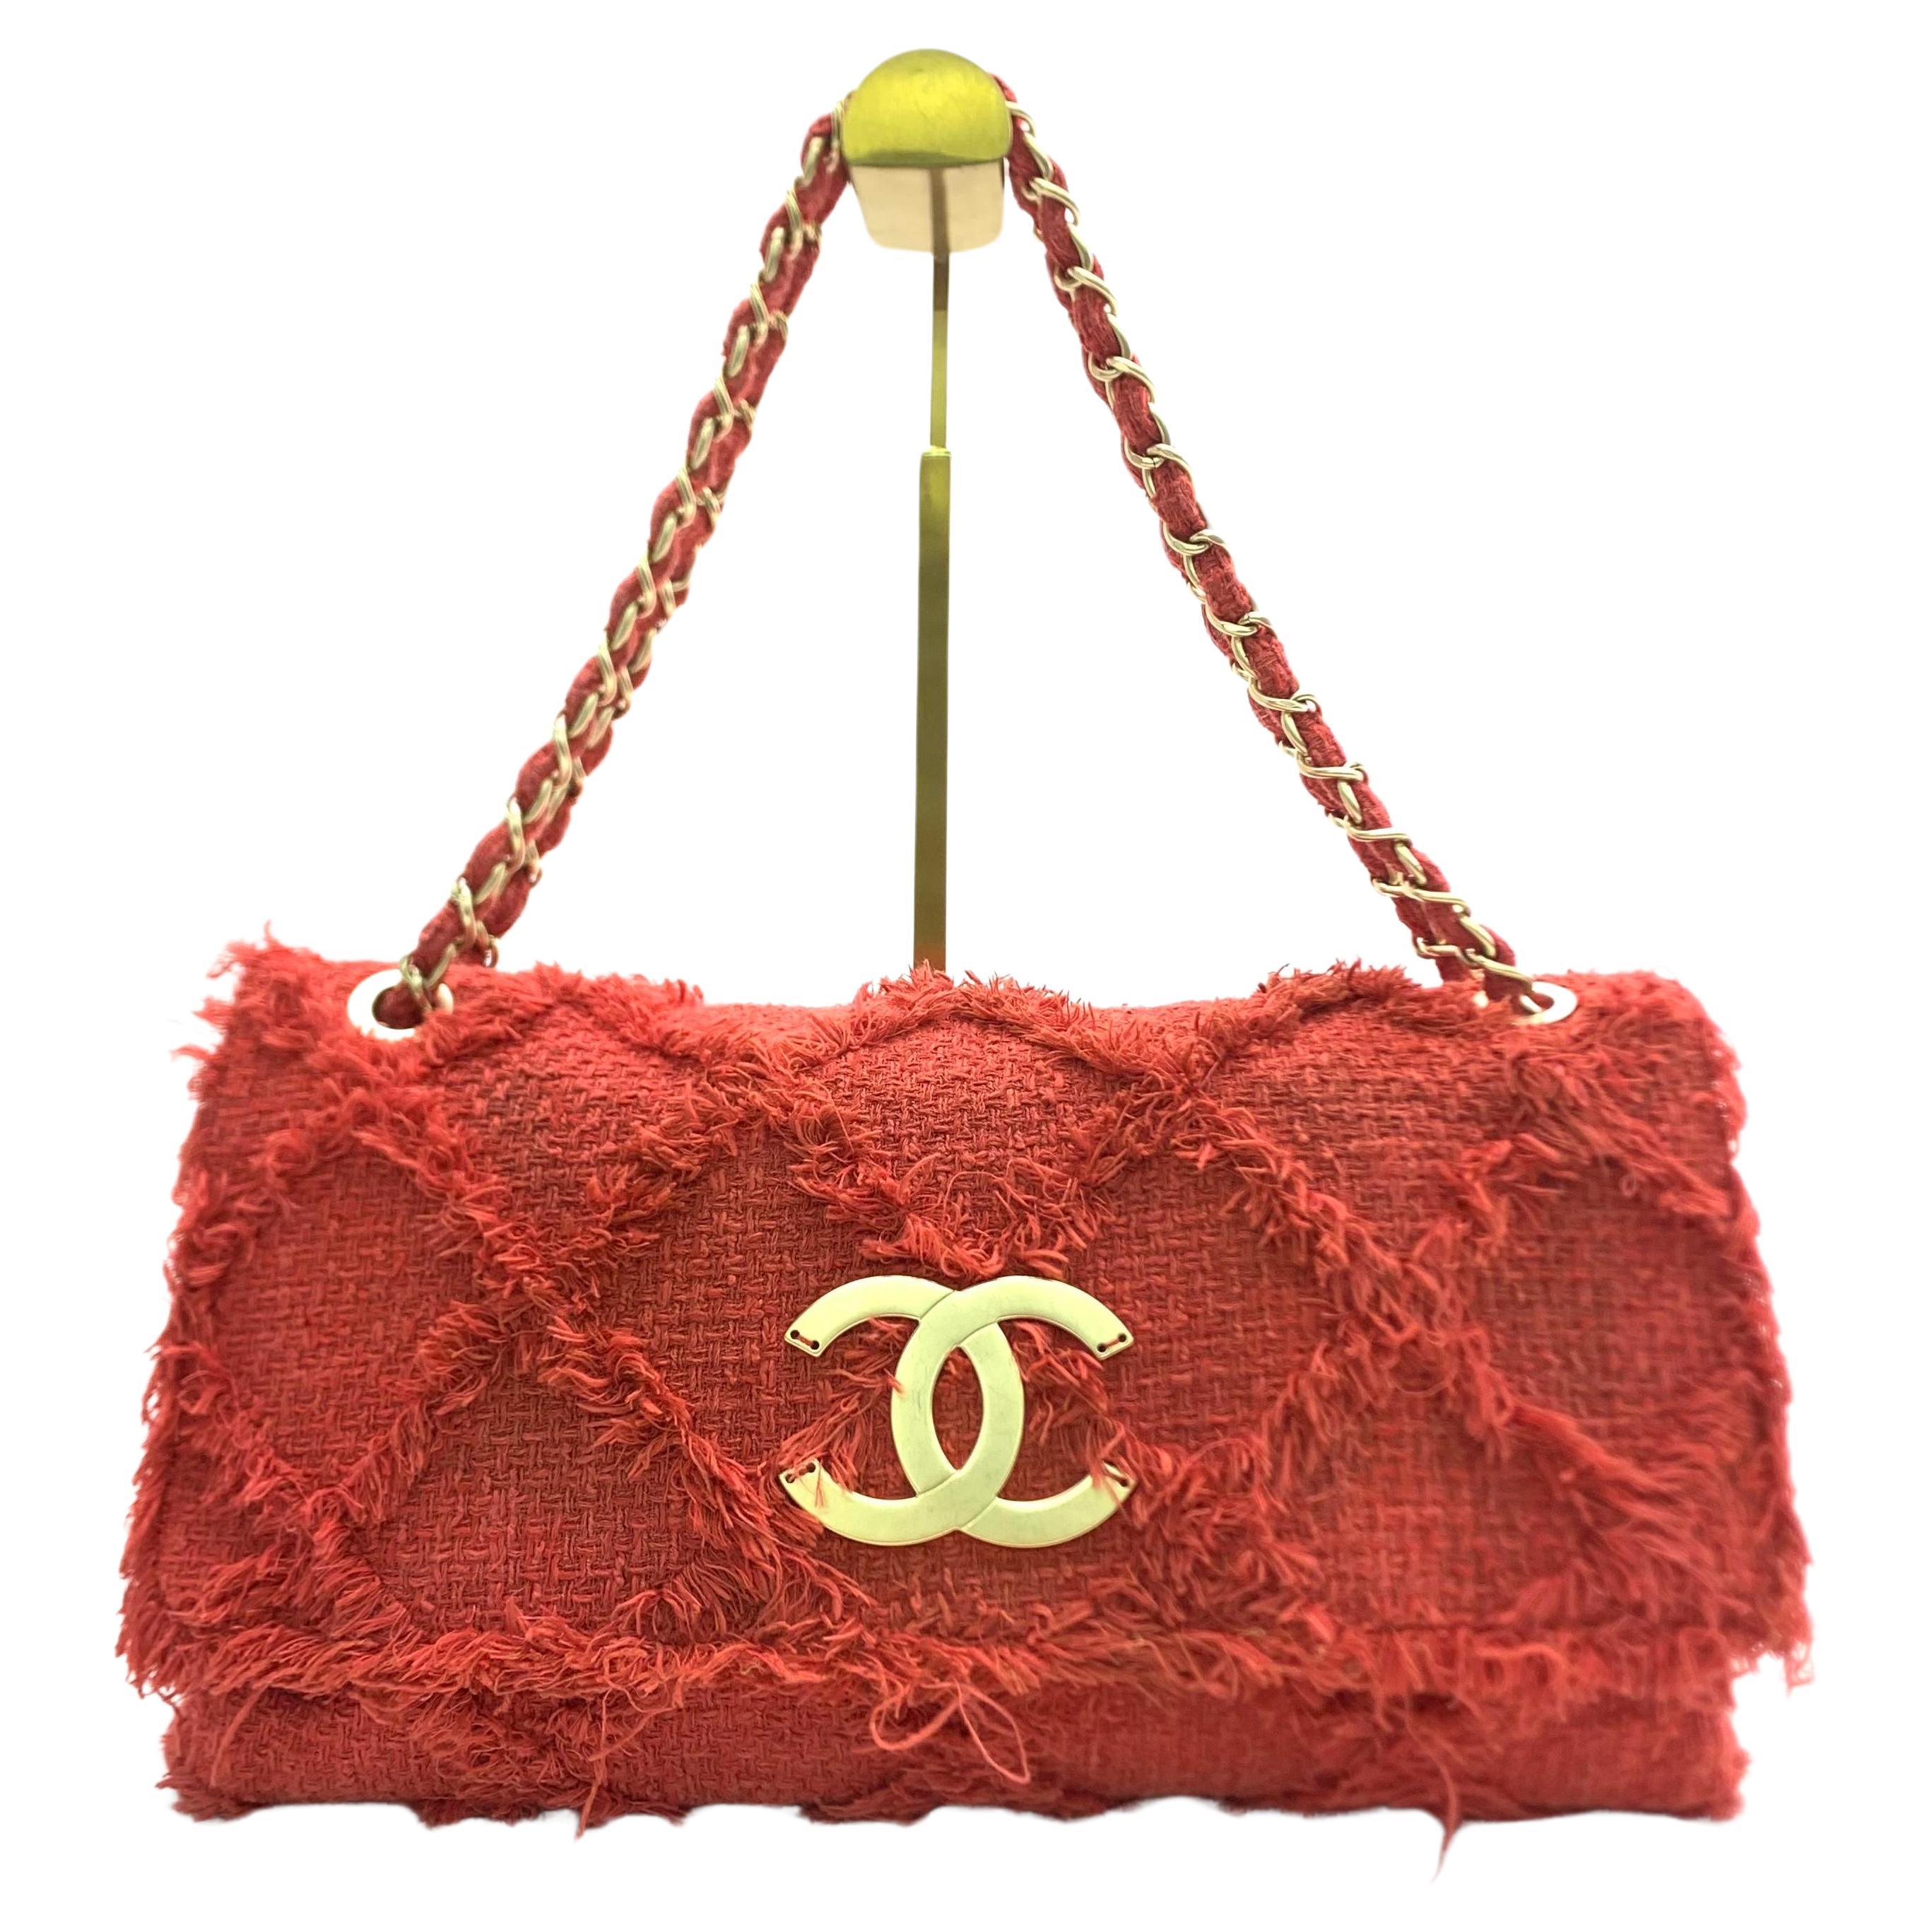 Chanel Red Diamond Stitch Tweed Maxi Nature Flap Bag For Sale